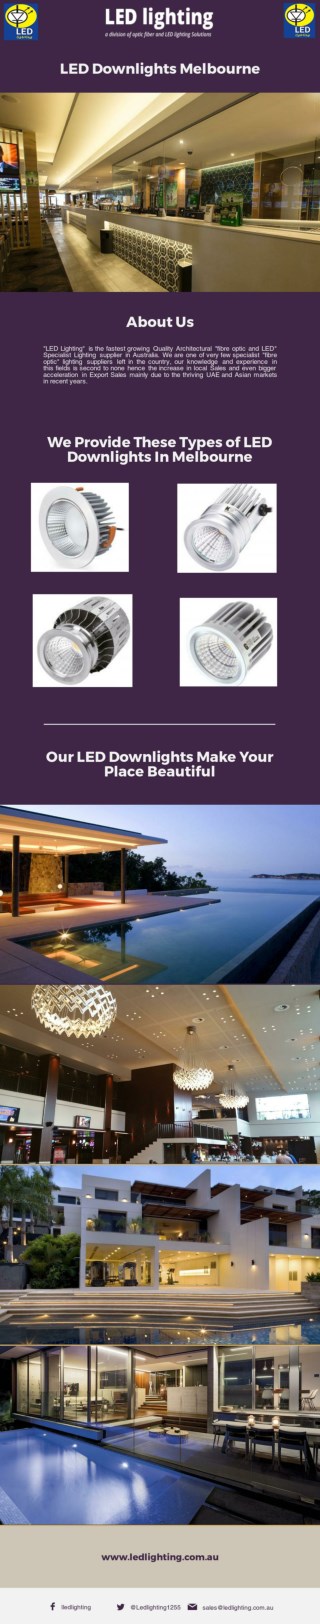 Looking For The Best LED Downlights Melbourne?